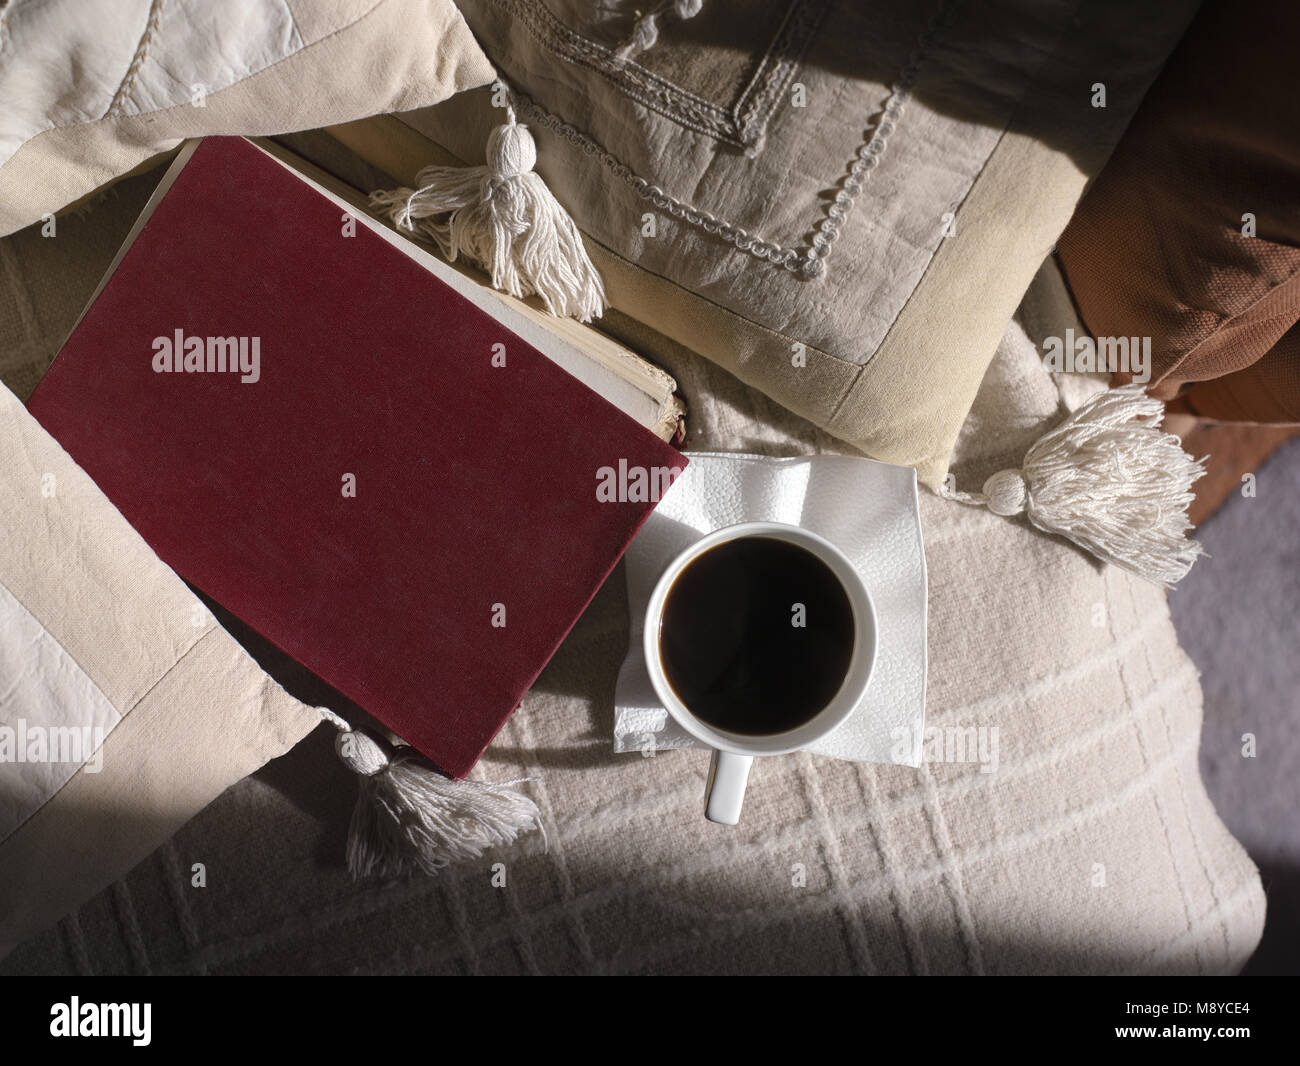 Red book and cup of coffee on a sofe covered with blanket and pillows, above view Stock Photo